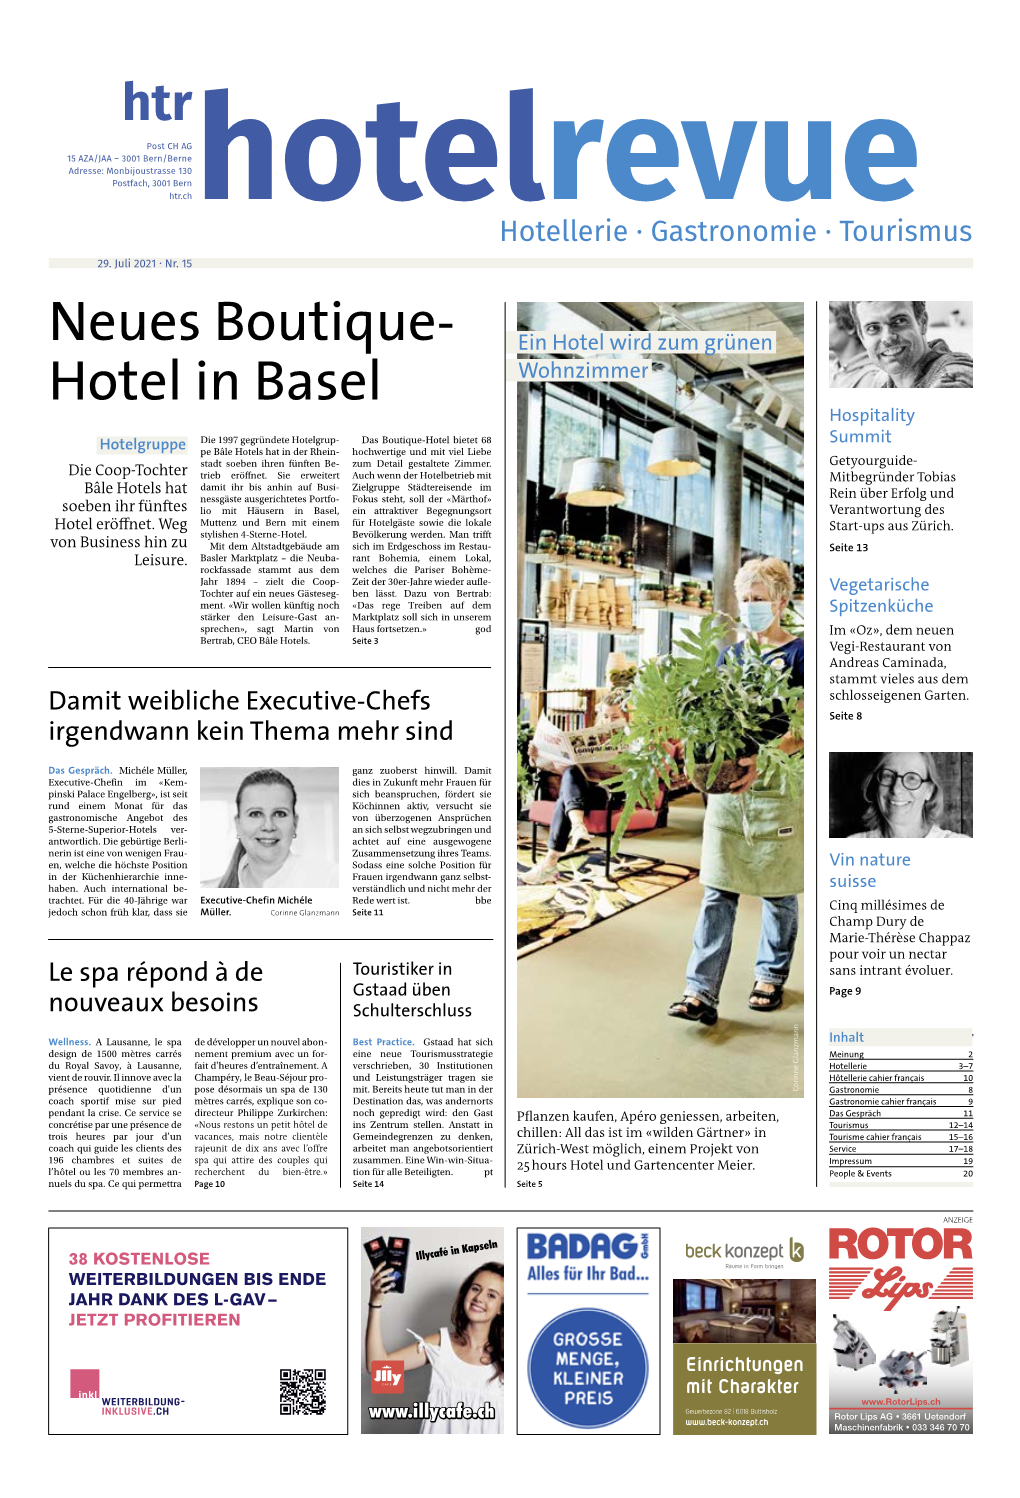 Neues Boutique- Hotel in Basel